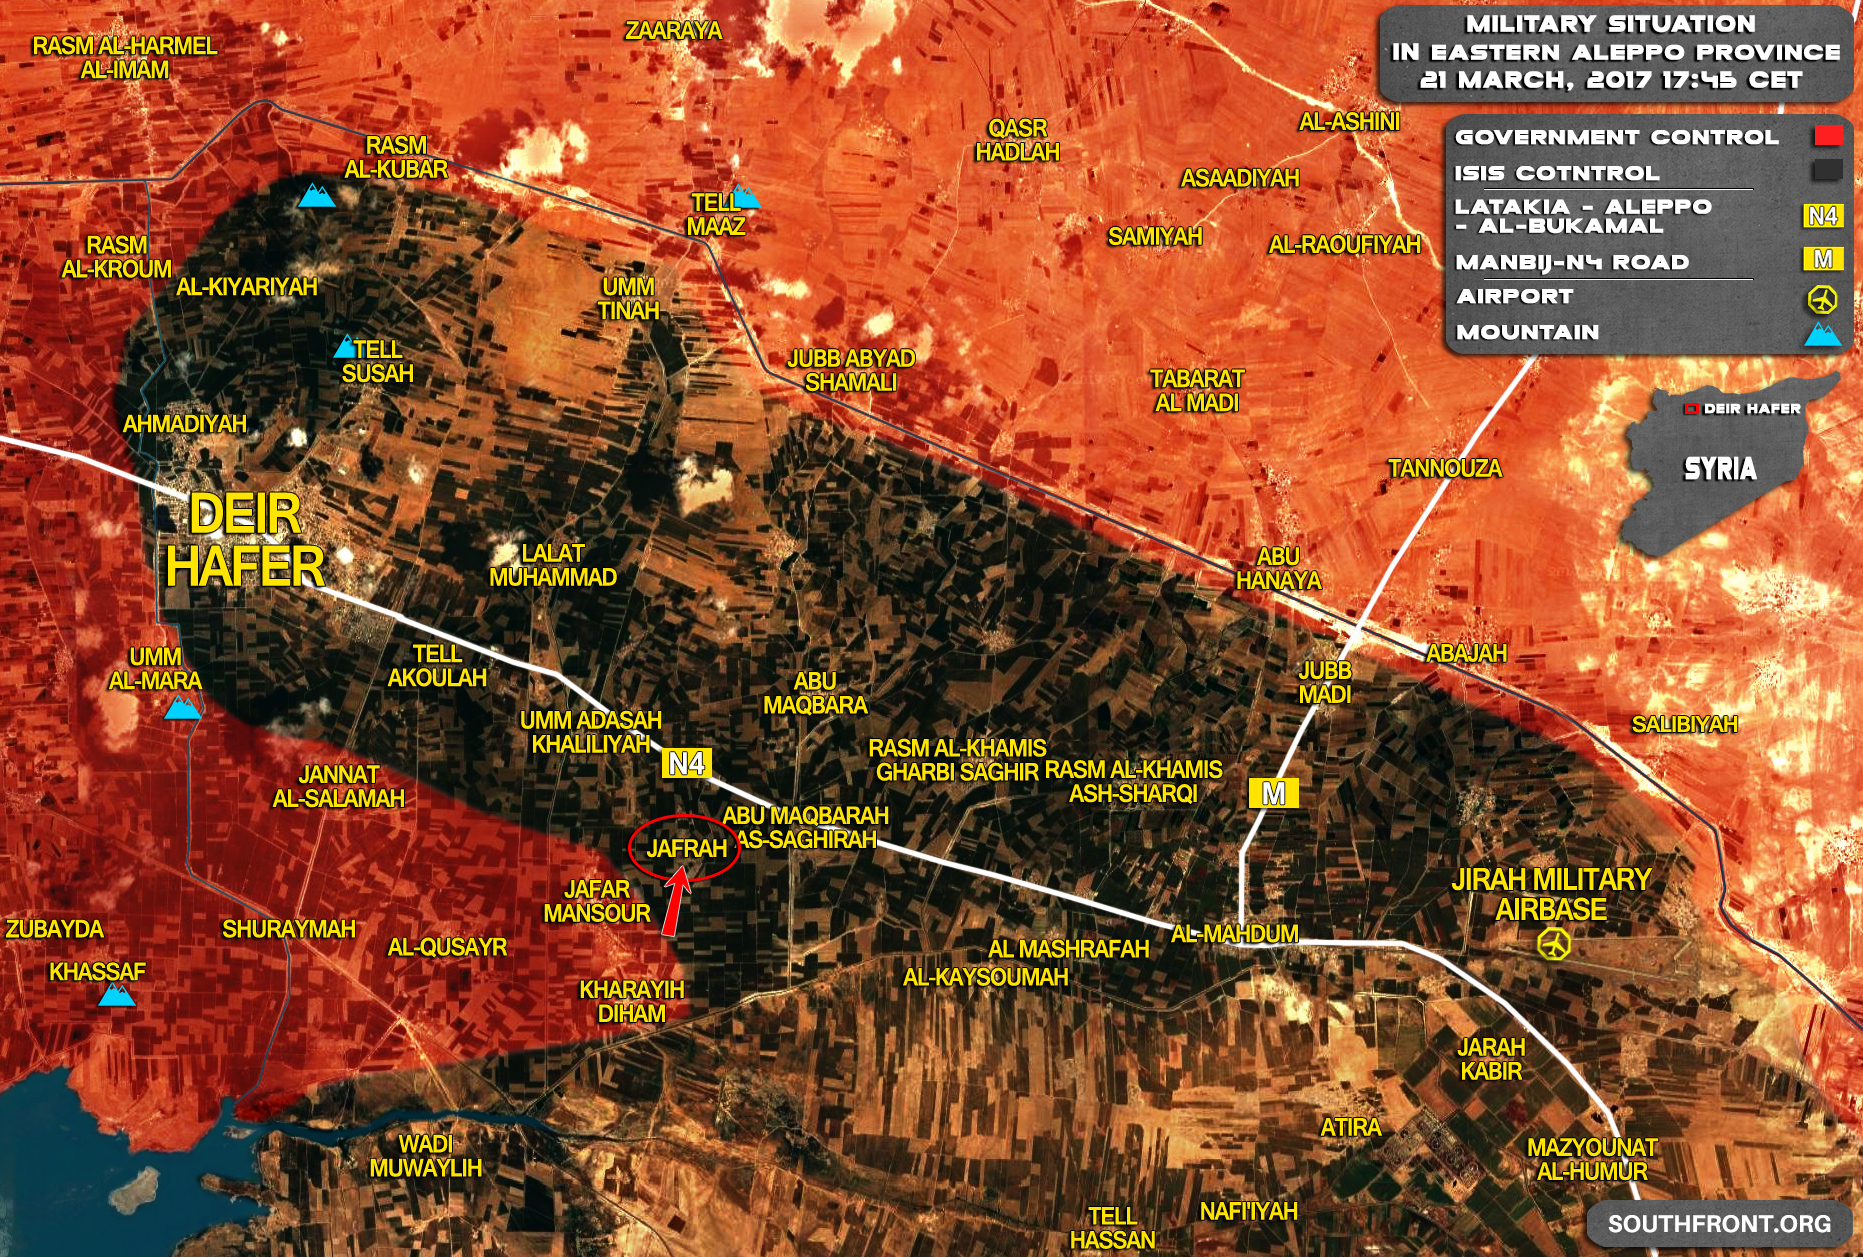 Government Forces Get Fire Control Of Highway West Of ISIS Stronghold Of Deir Hafer - Reports